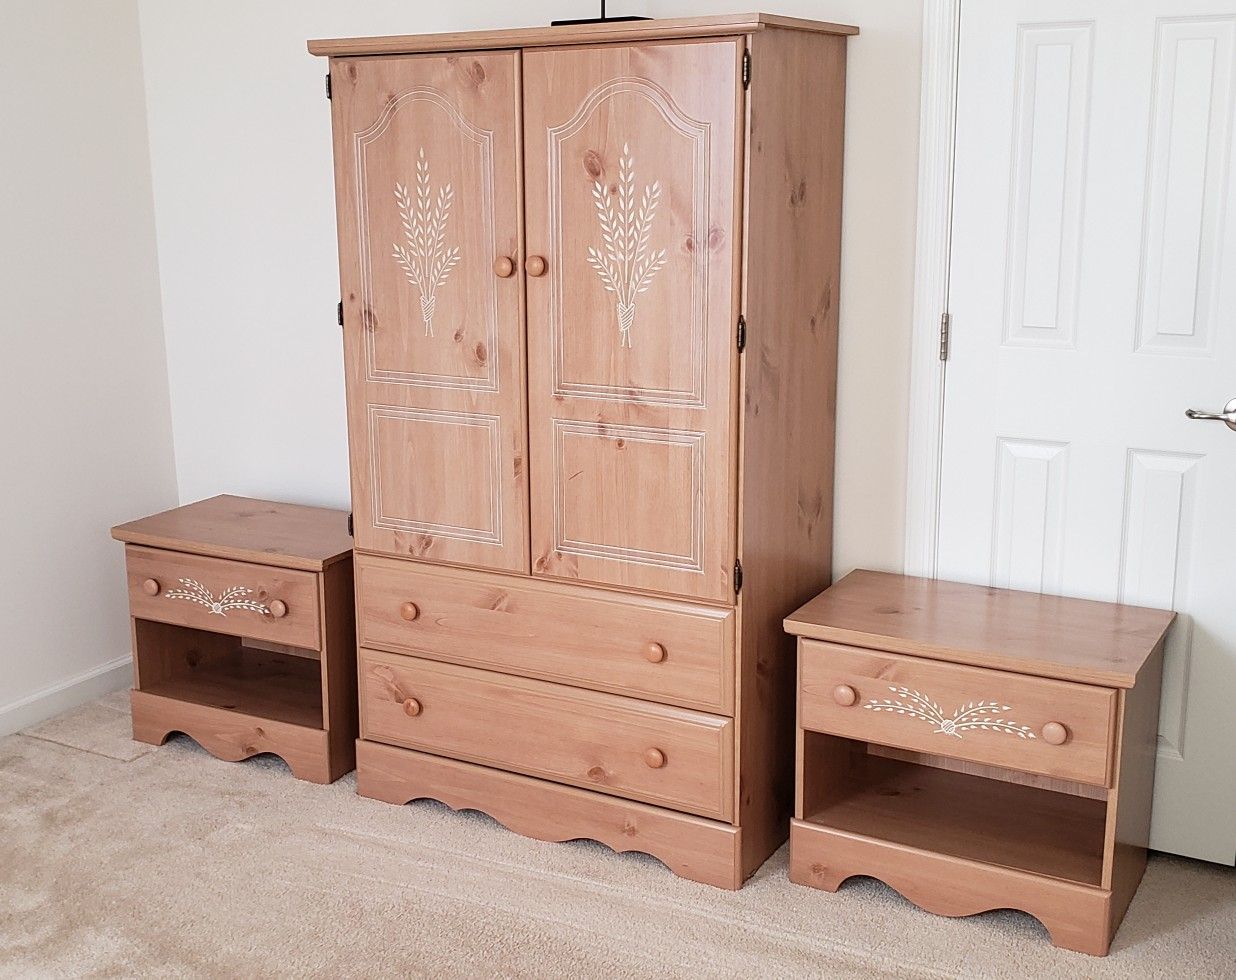 Wardrobe/ Armoire with two night stands.